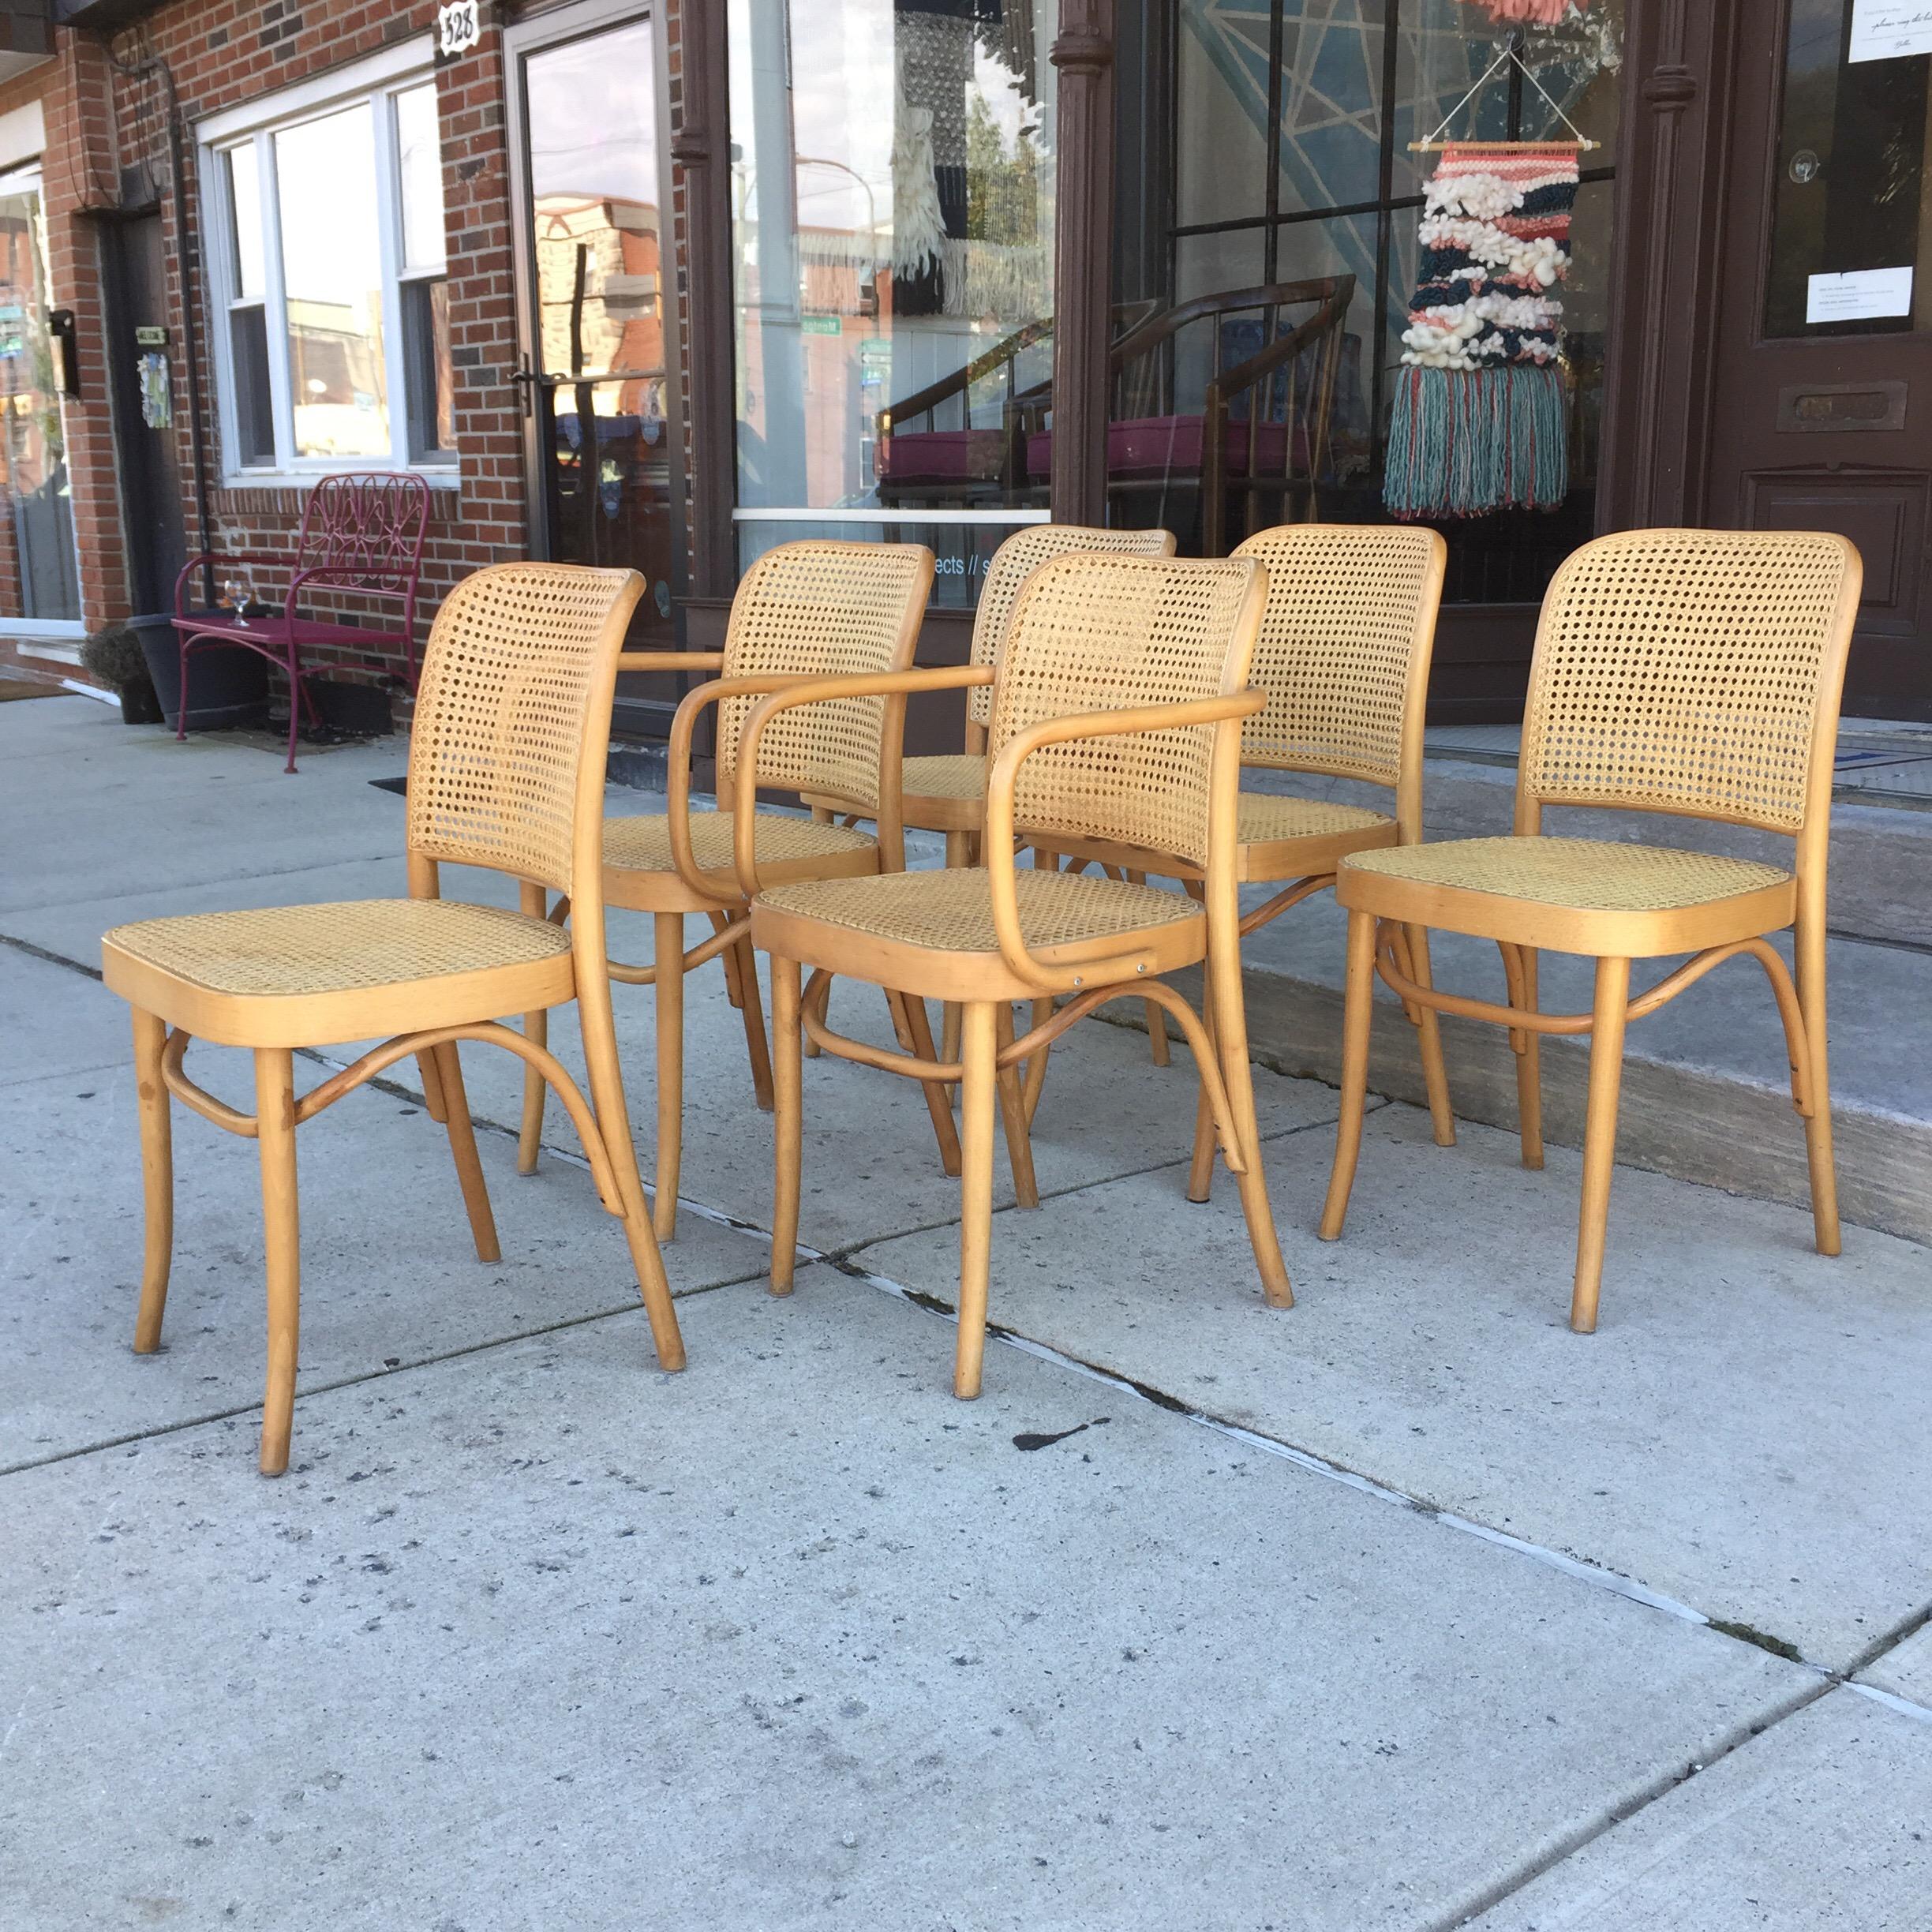 Lovely set of six vintage dining/bistro chairs designed by Josef Hoffman. Caning and bentwood are sturdy and intact. Legs show slight scuffing from use, but present beautifully. 4 side chairs and two armchairs.